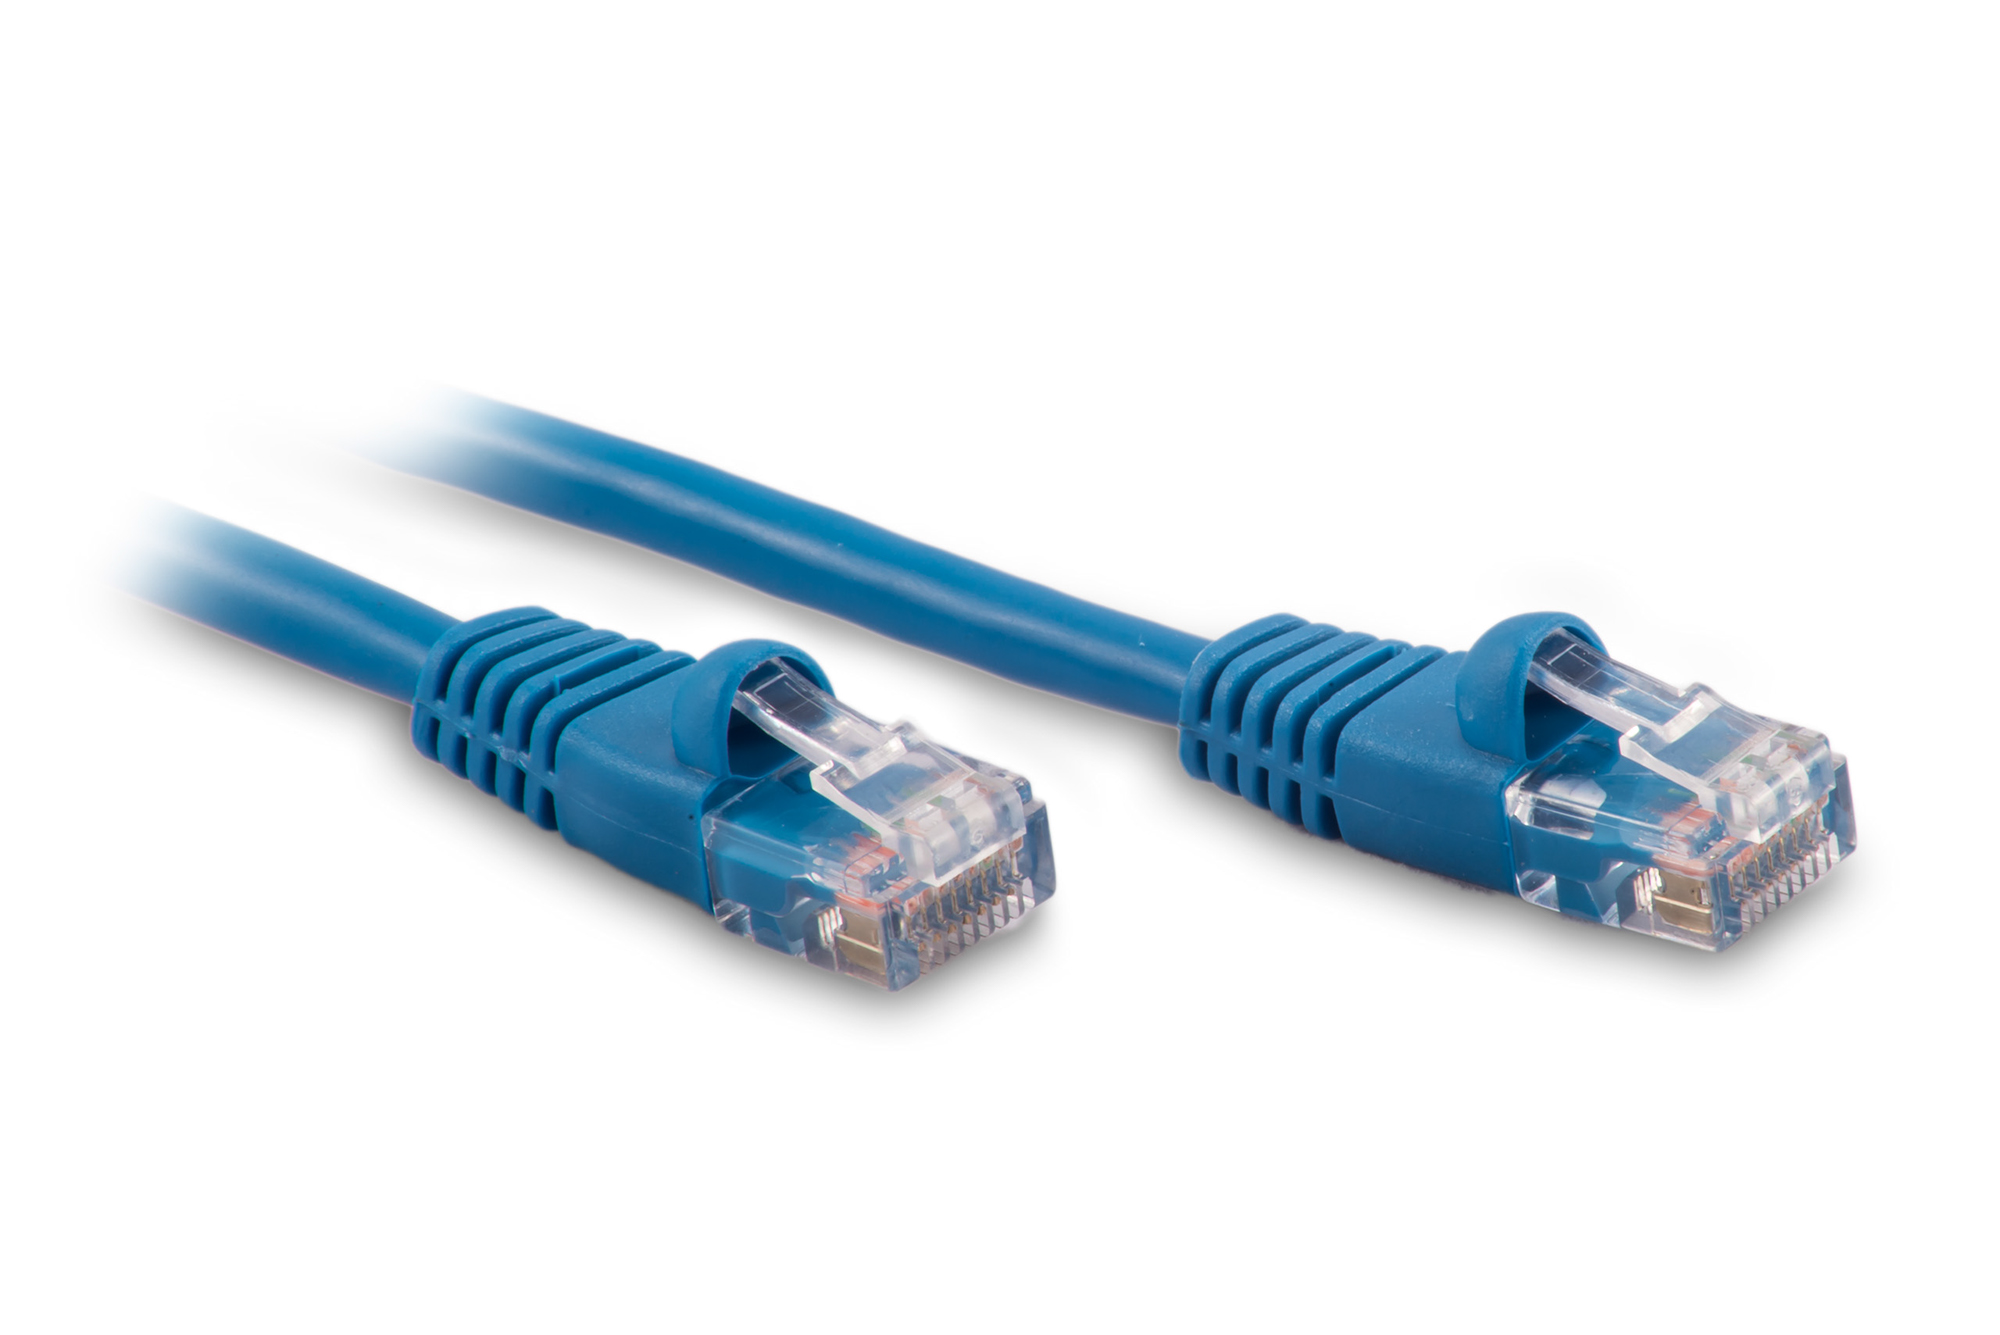 50ft Cat5e Ethernet Patch Cable - Blue Color - Snagless Boot, Stranded, RJ45, 350Mhz, 24AWG